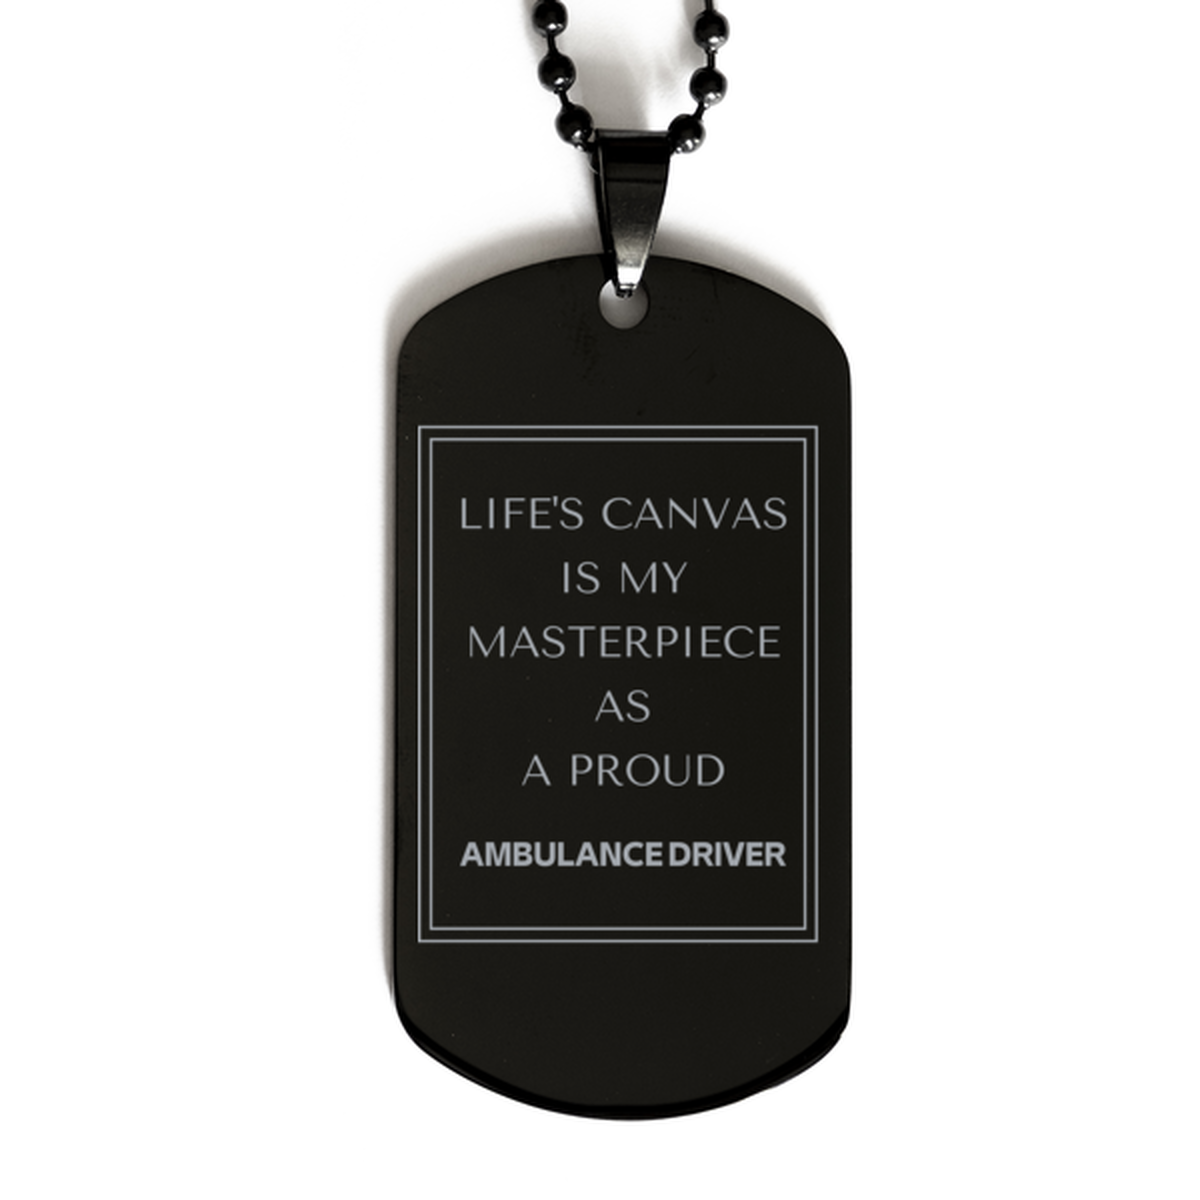 Proud Ambulance Driver Gifts, Life's canvas is my masterpiece, Epic Birthday Christmas Unique Black Dog Tag For Ambulance Driver, Coworkers, Men, Women, Friends